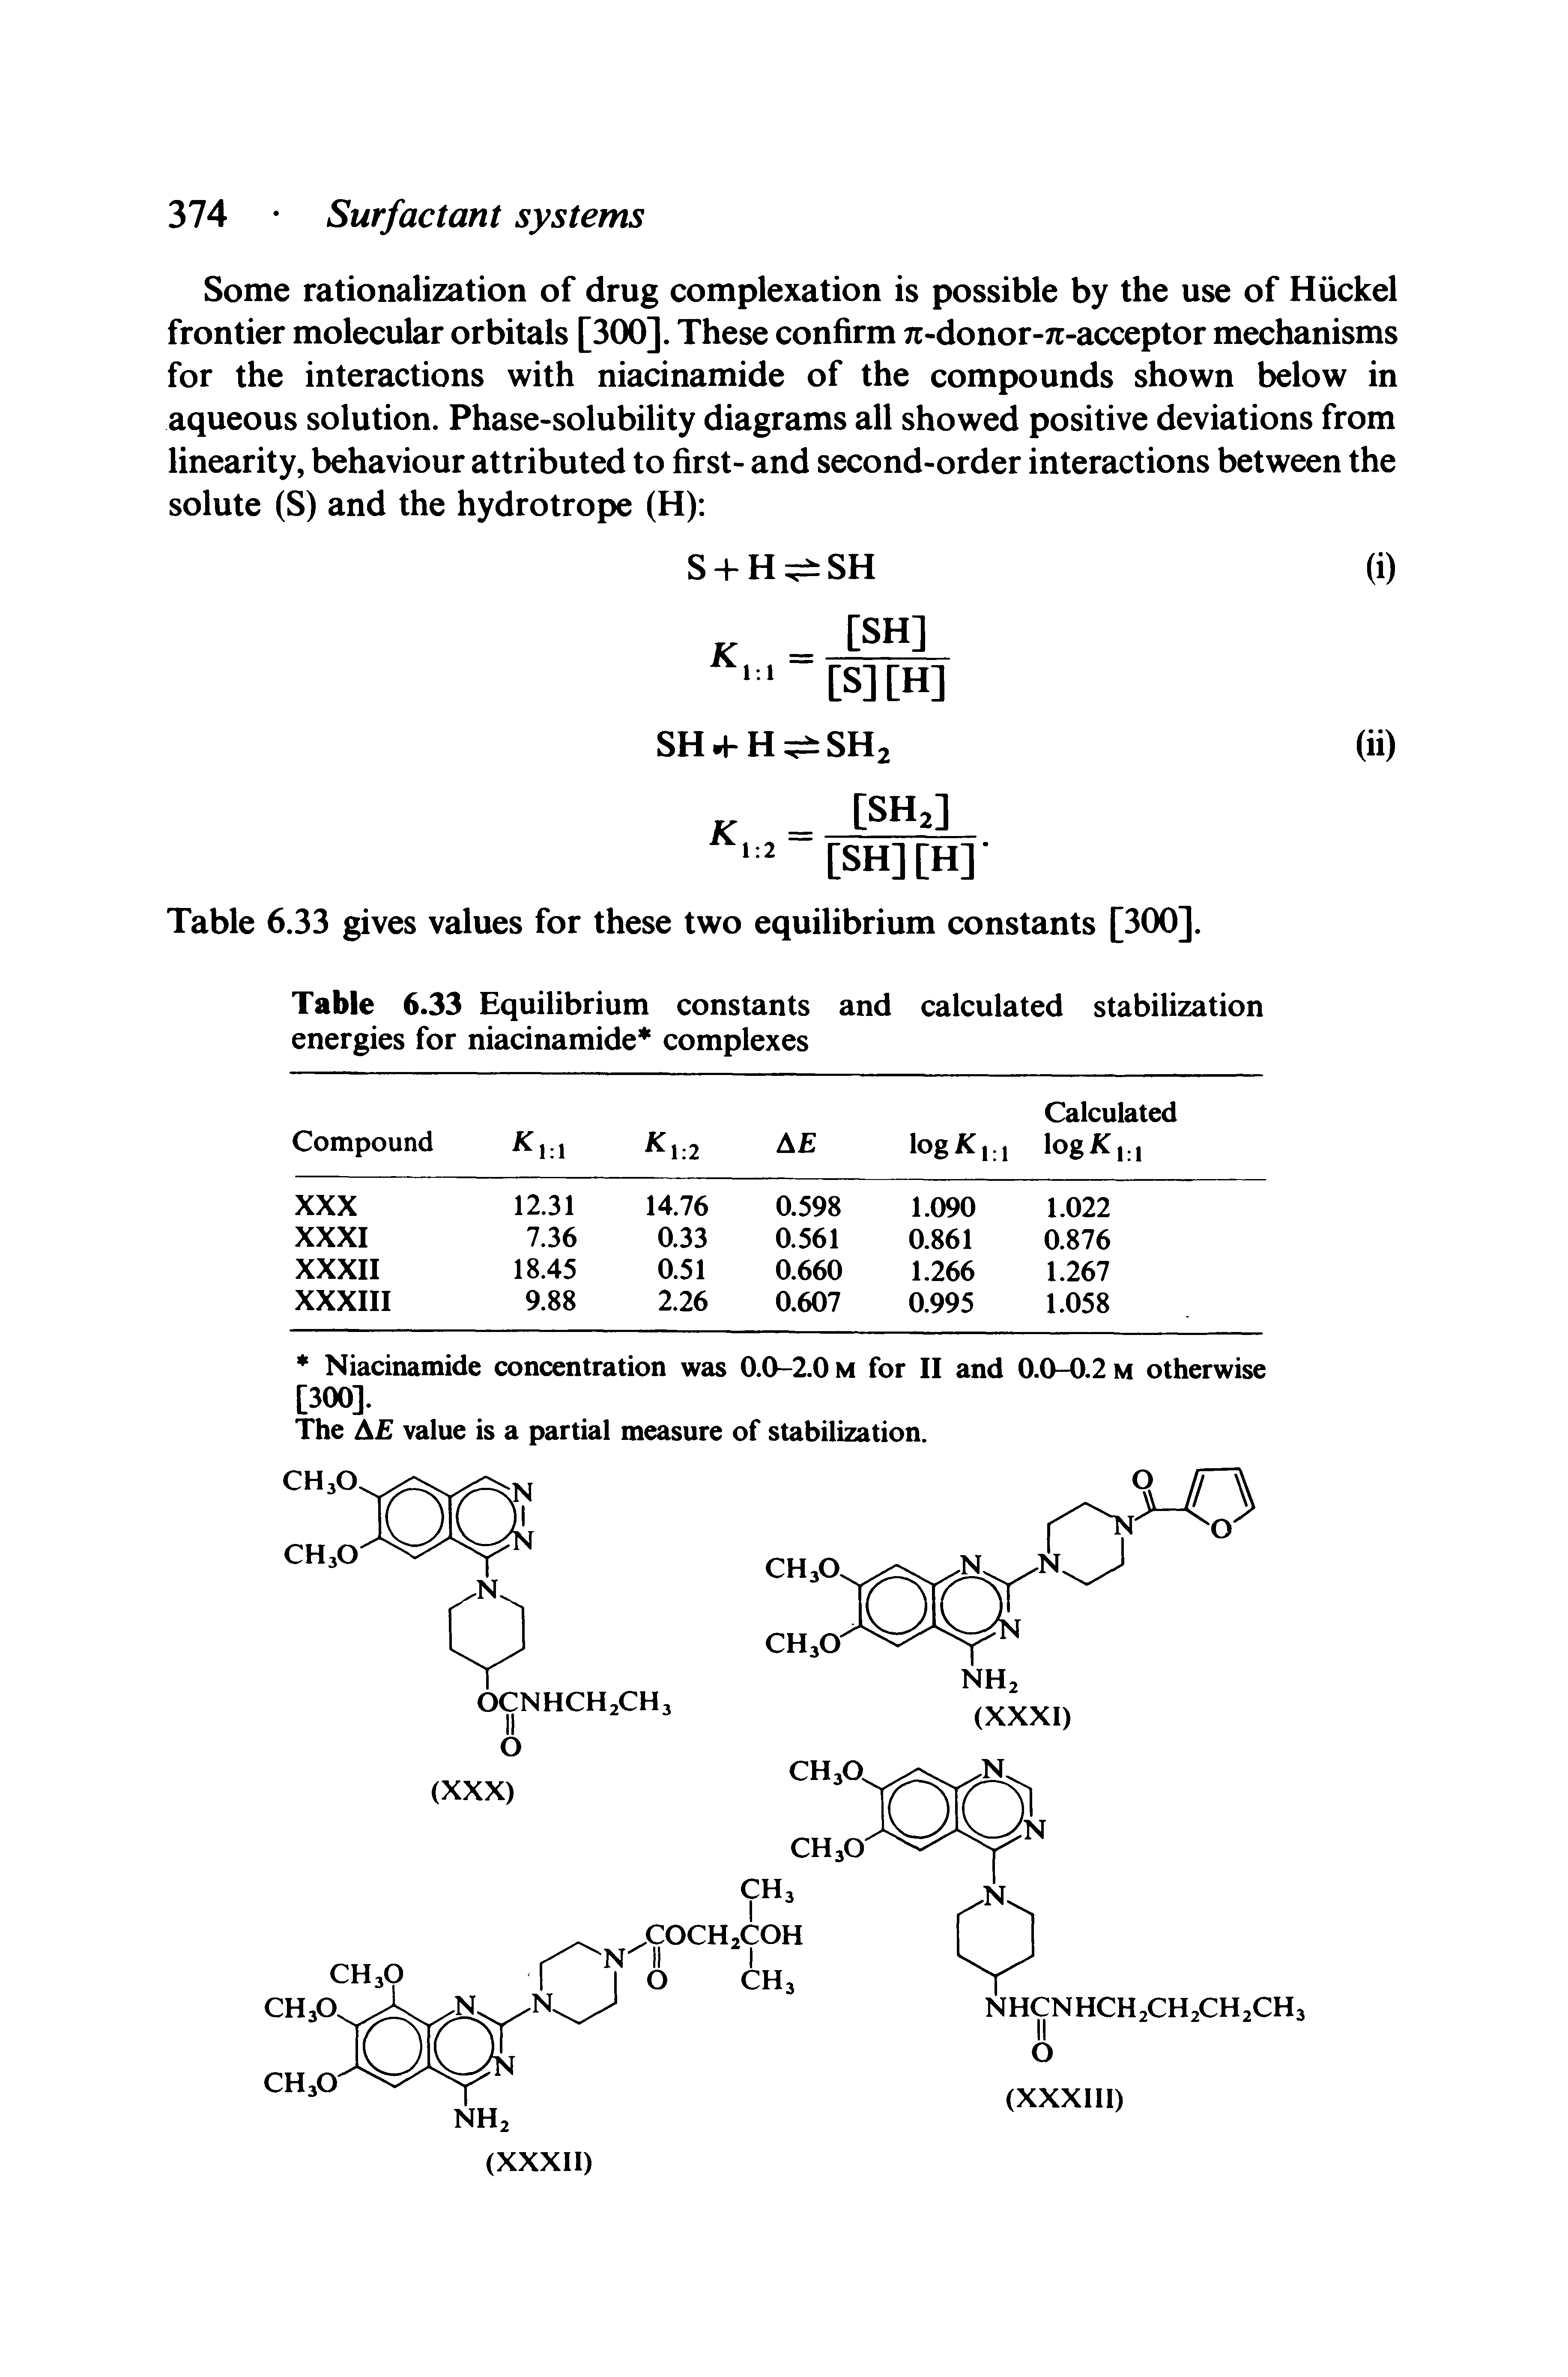 Table 6.33 Equilibrium constants and calculated stabilization energies for niacinamide complexes...